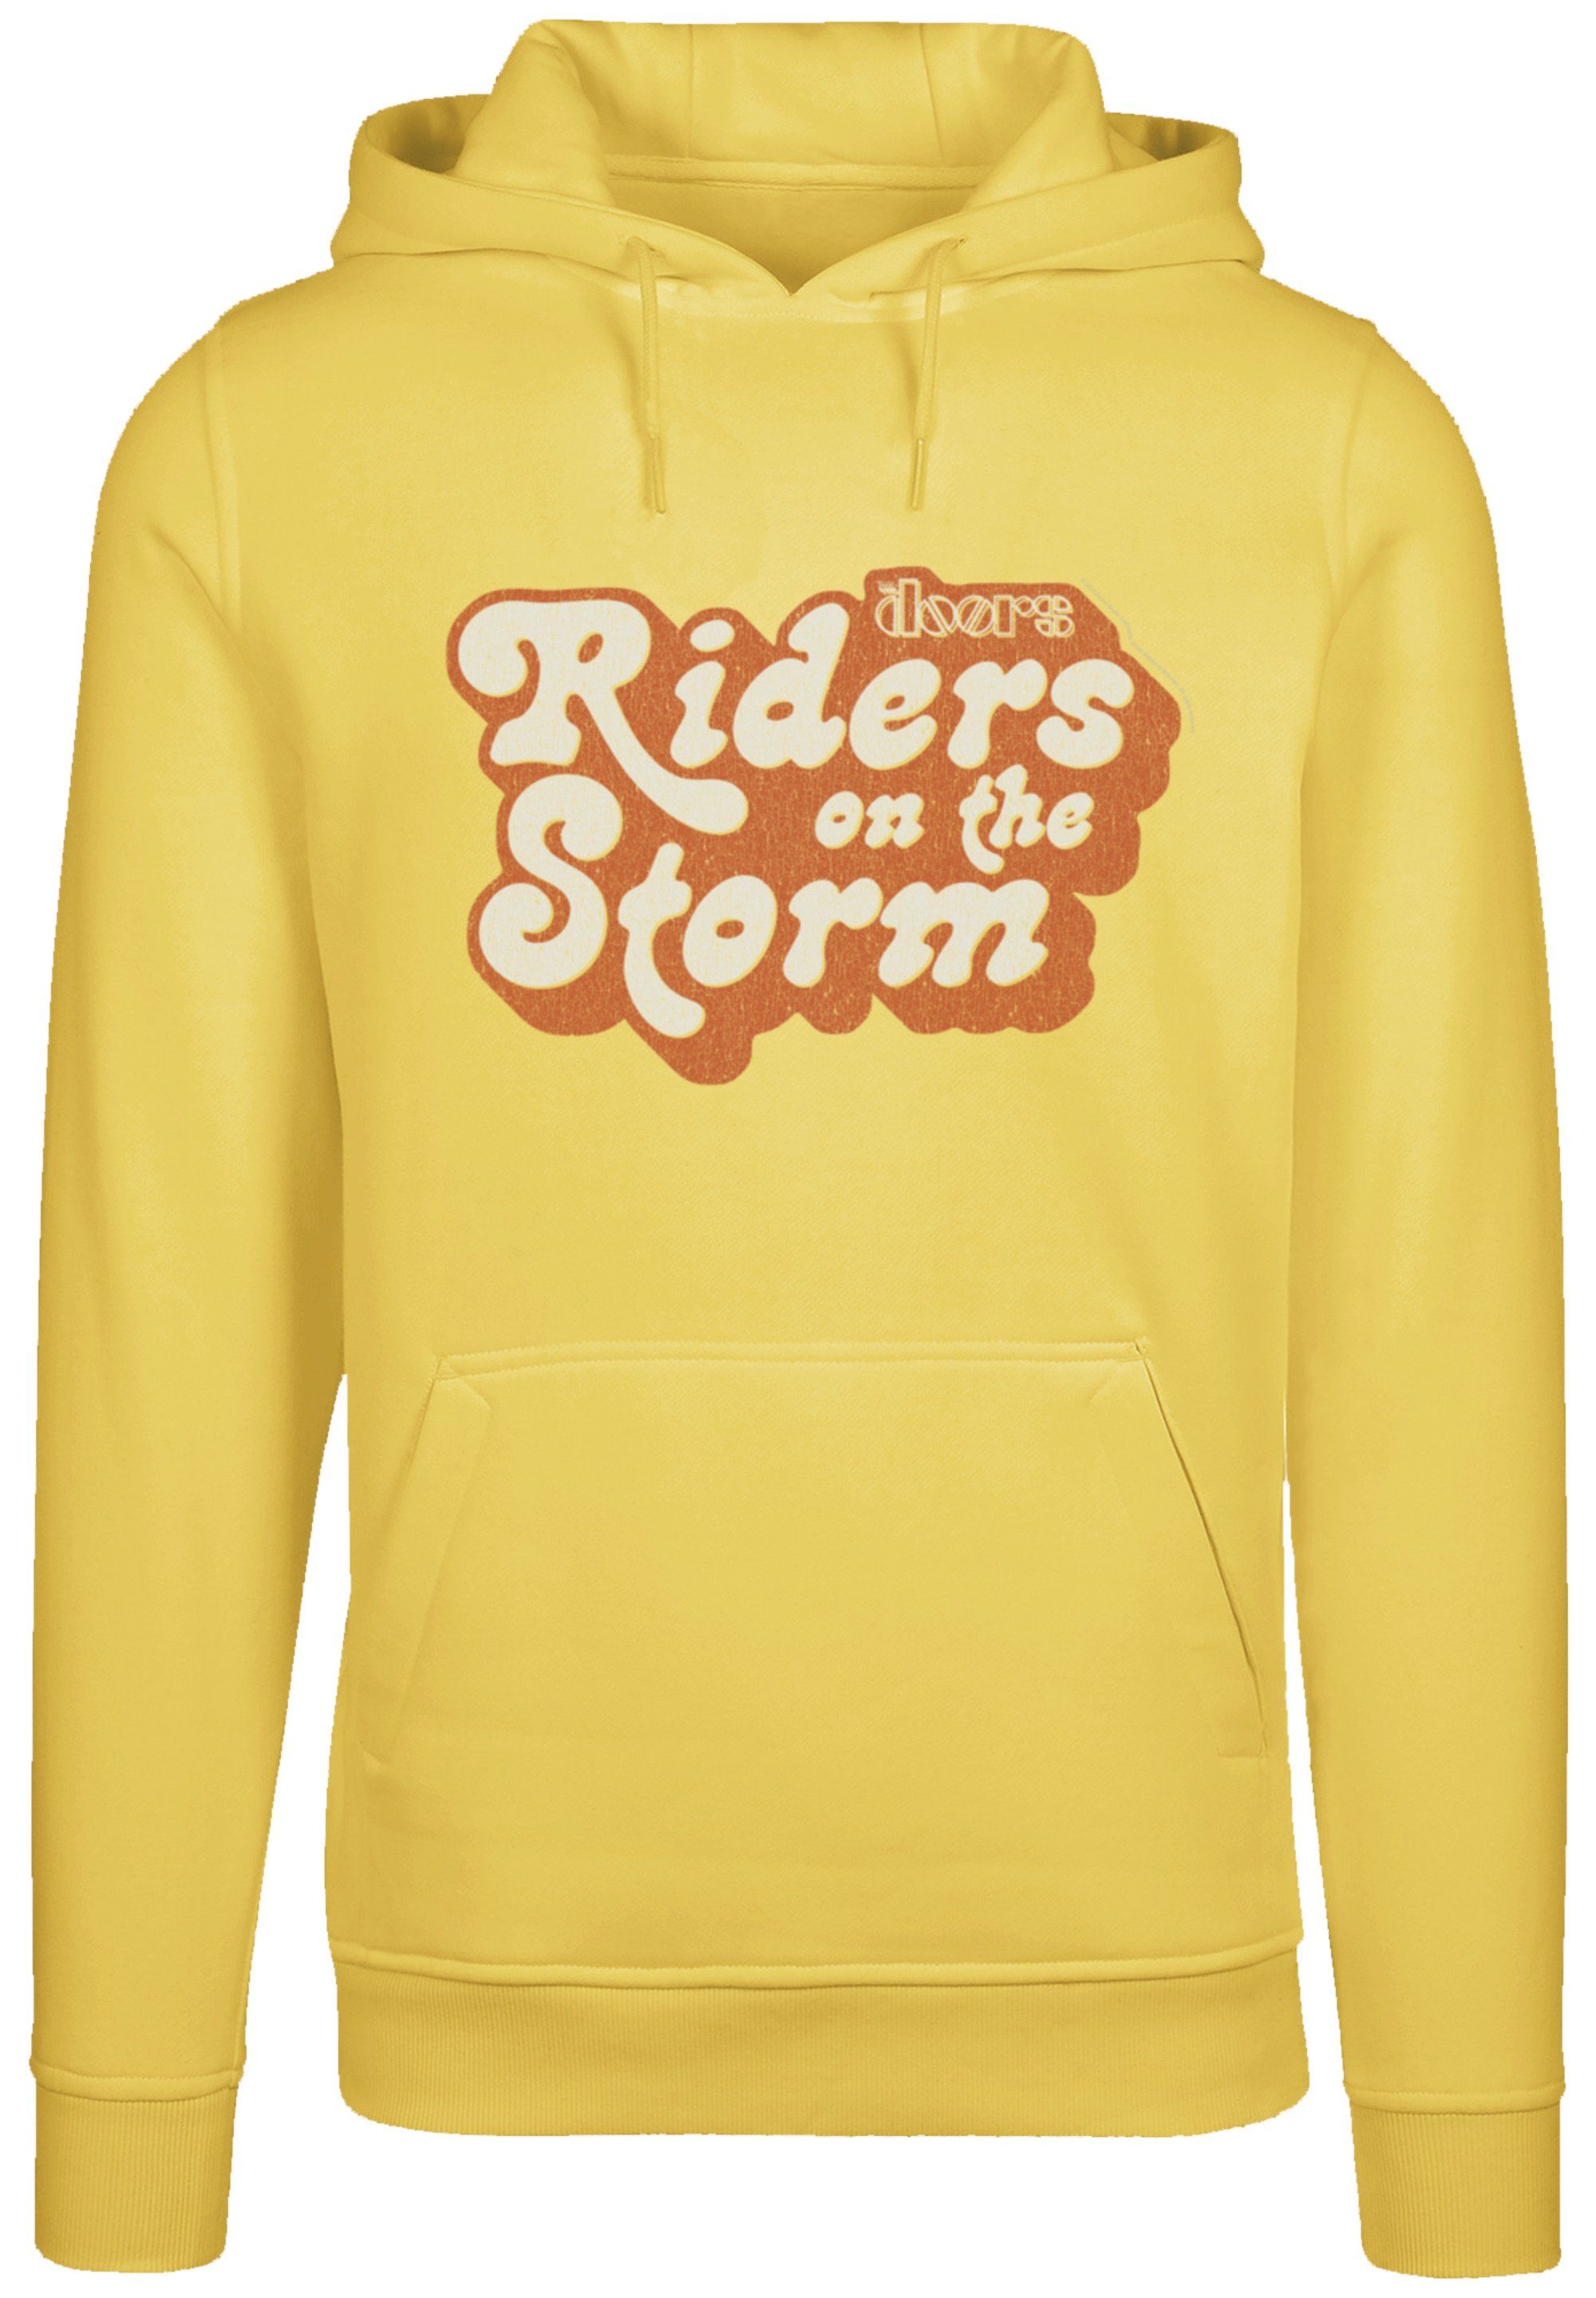 F4NT4STIC Hoodie The Doors Qualität, Logo taxi Band, the Storm Logo on Premium yellow Riders Band Music